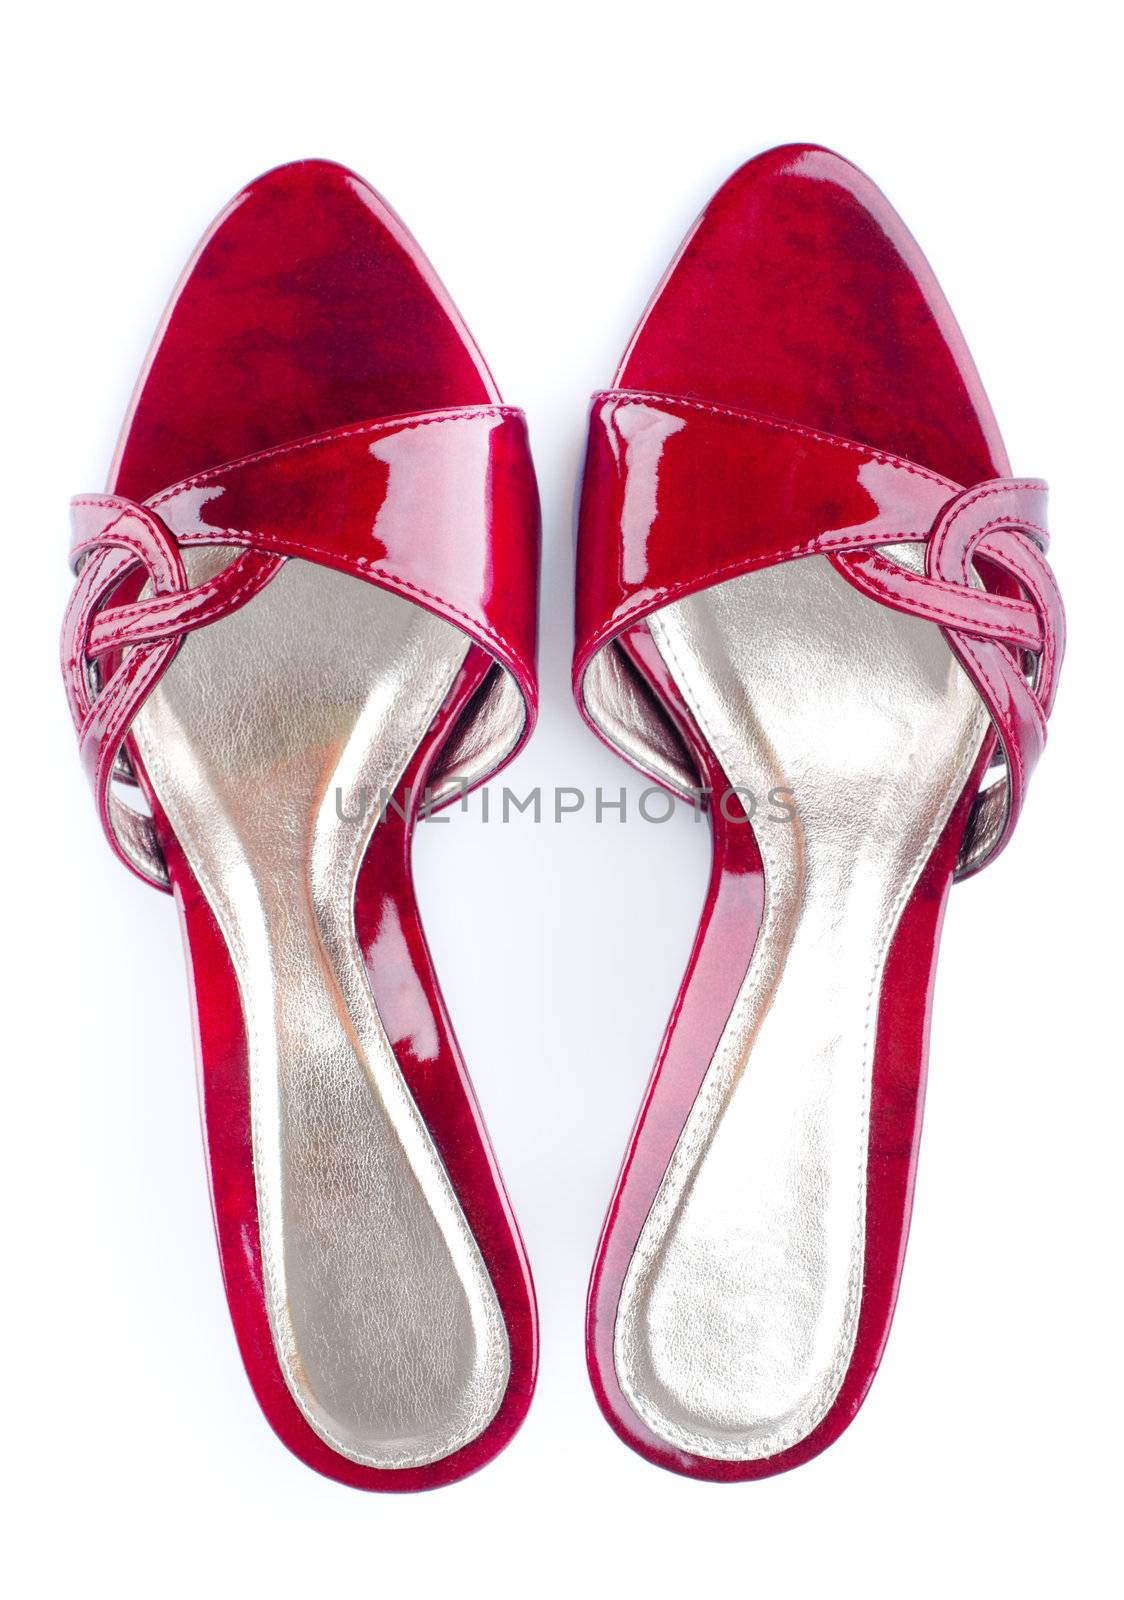 Pair of high heel red female shoes isolated on white background. 